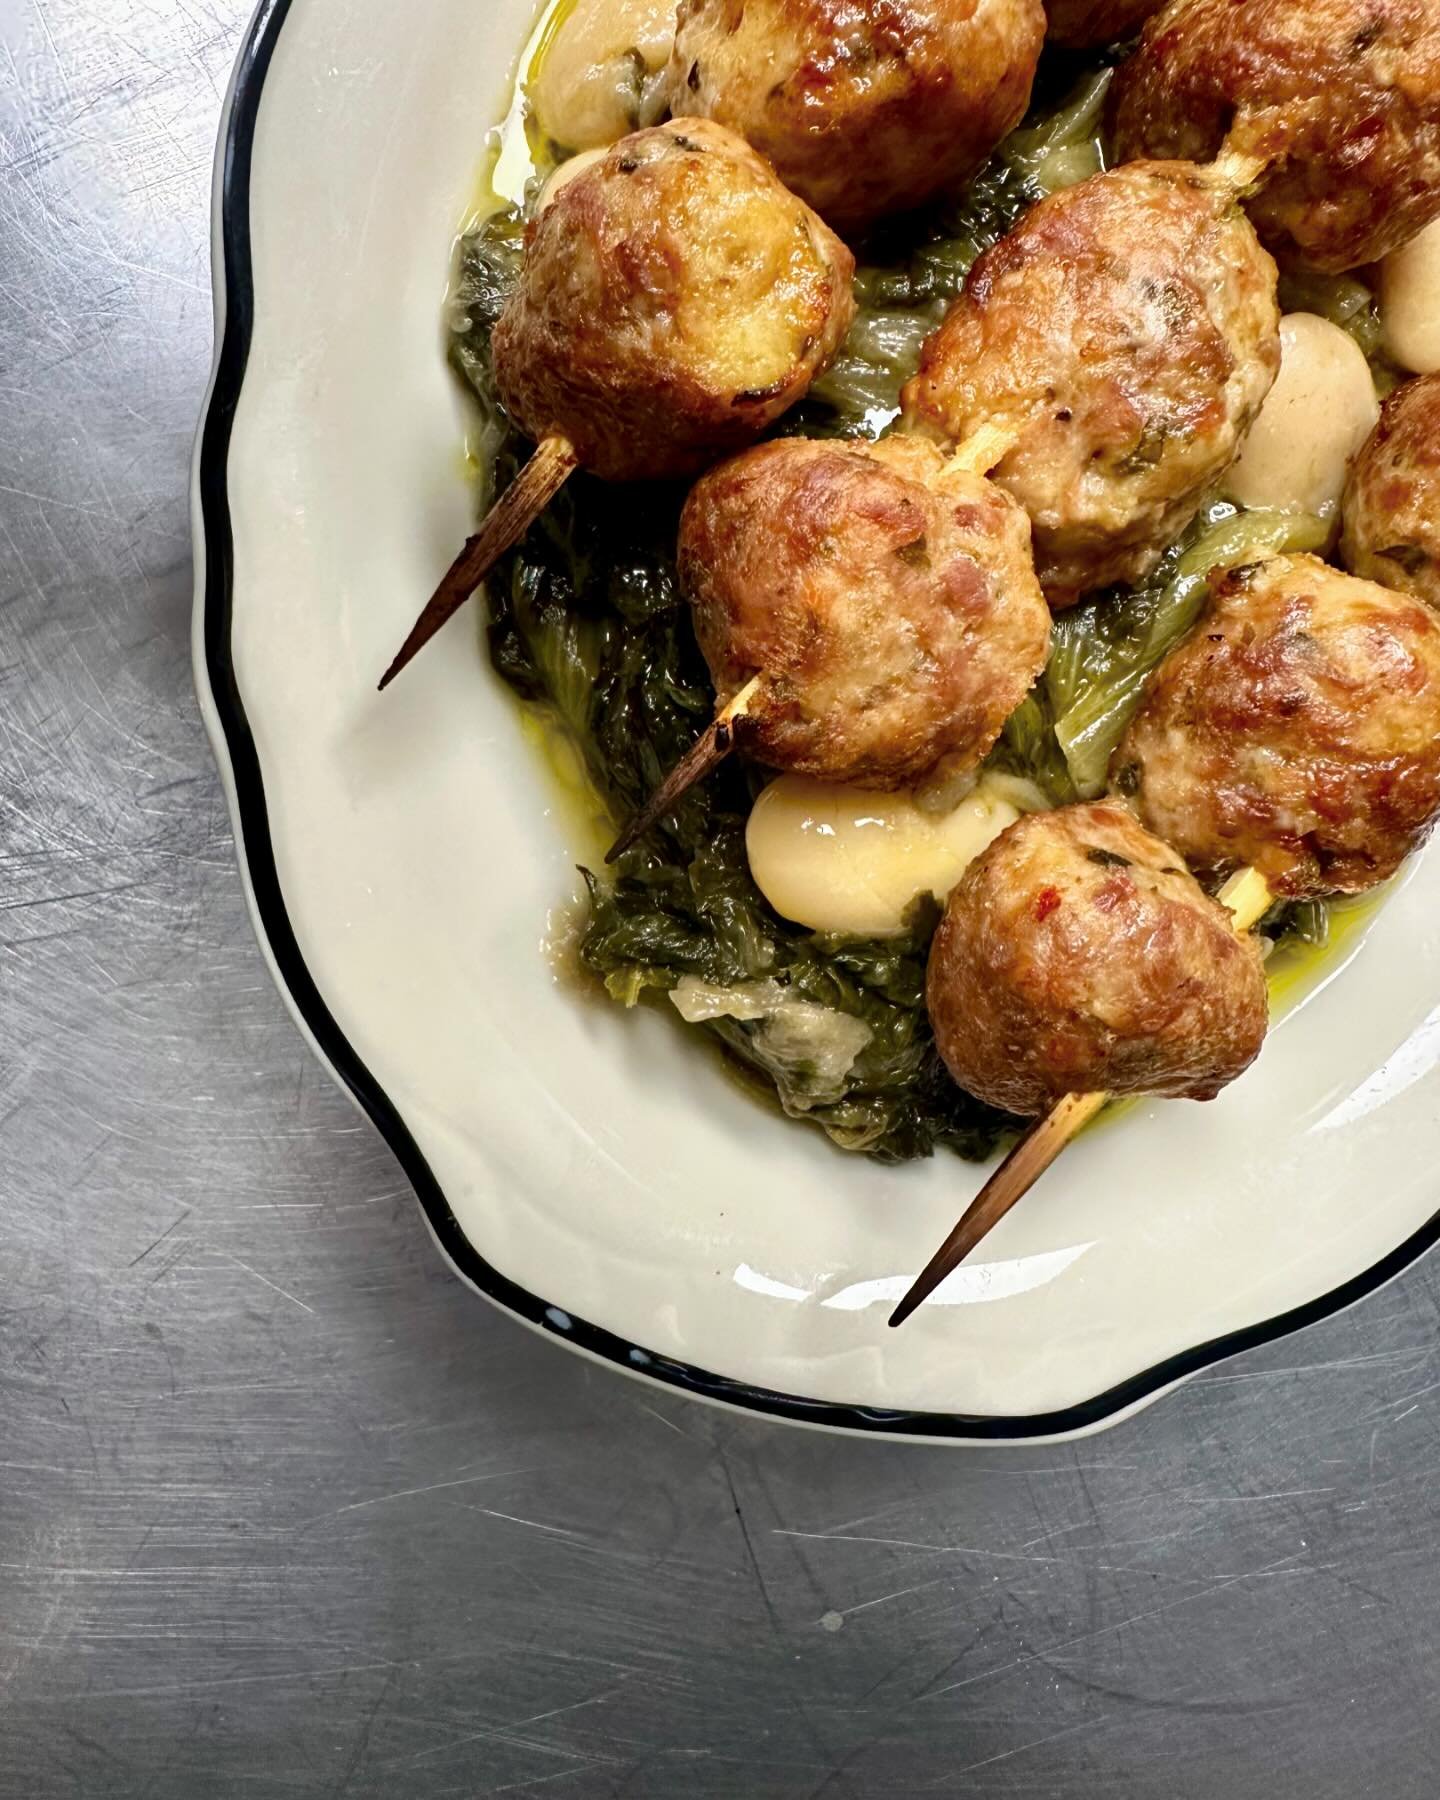 Channeling the old country here. Tender meatball spiedini, absolutely hammered (50 shades of grey) escarole with some Gigante beans and plenty of some fine as frog hair olive oil from @groveandvine Happy Sunday amici!
.
.
.
#meatball #spiedini #escar